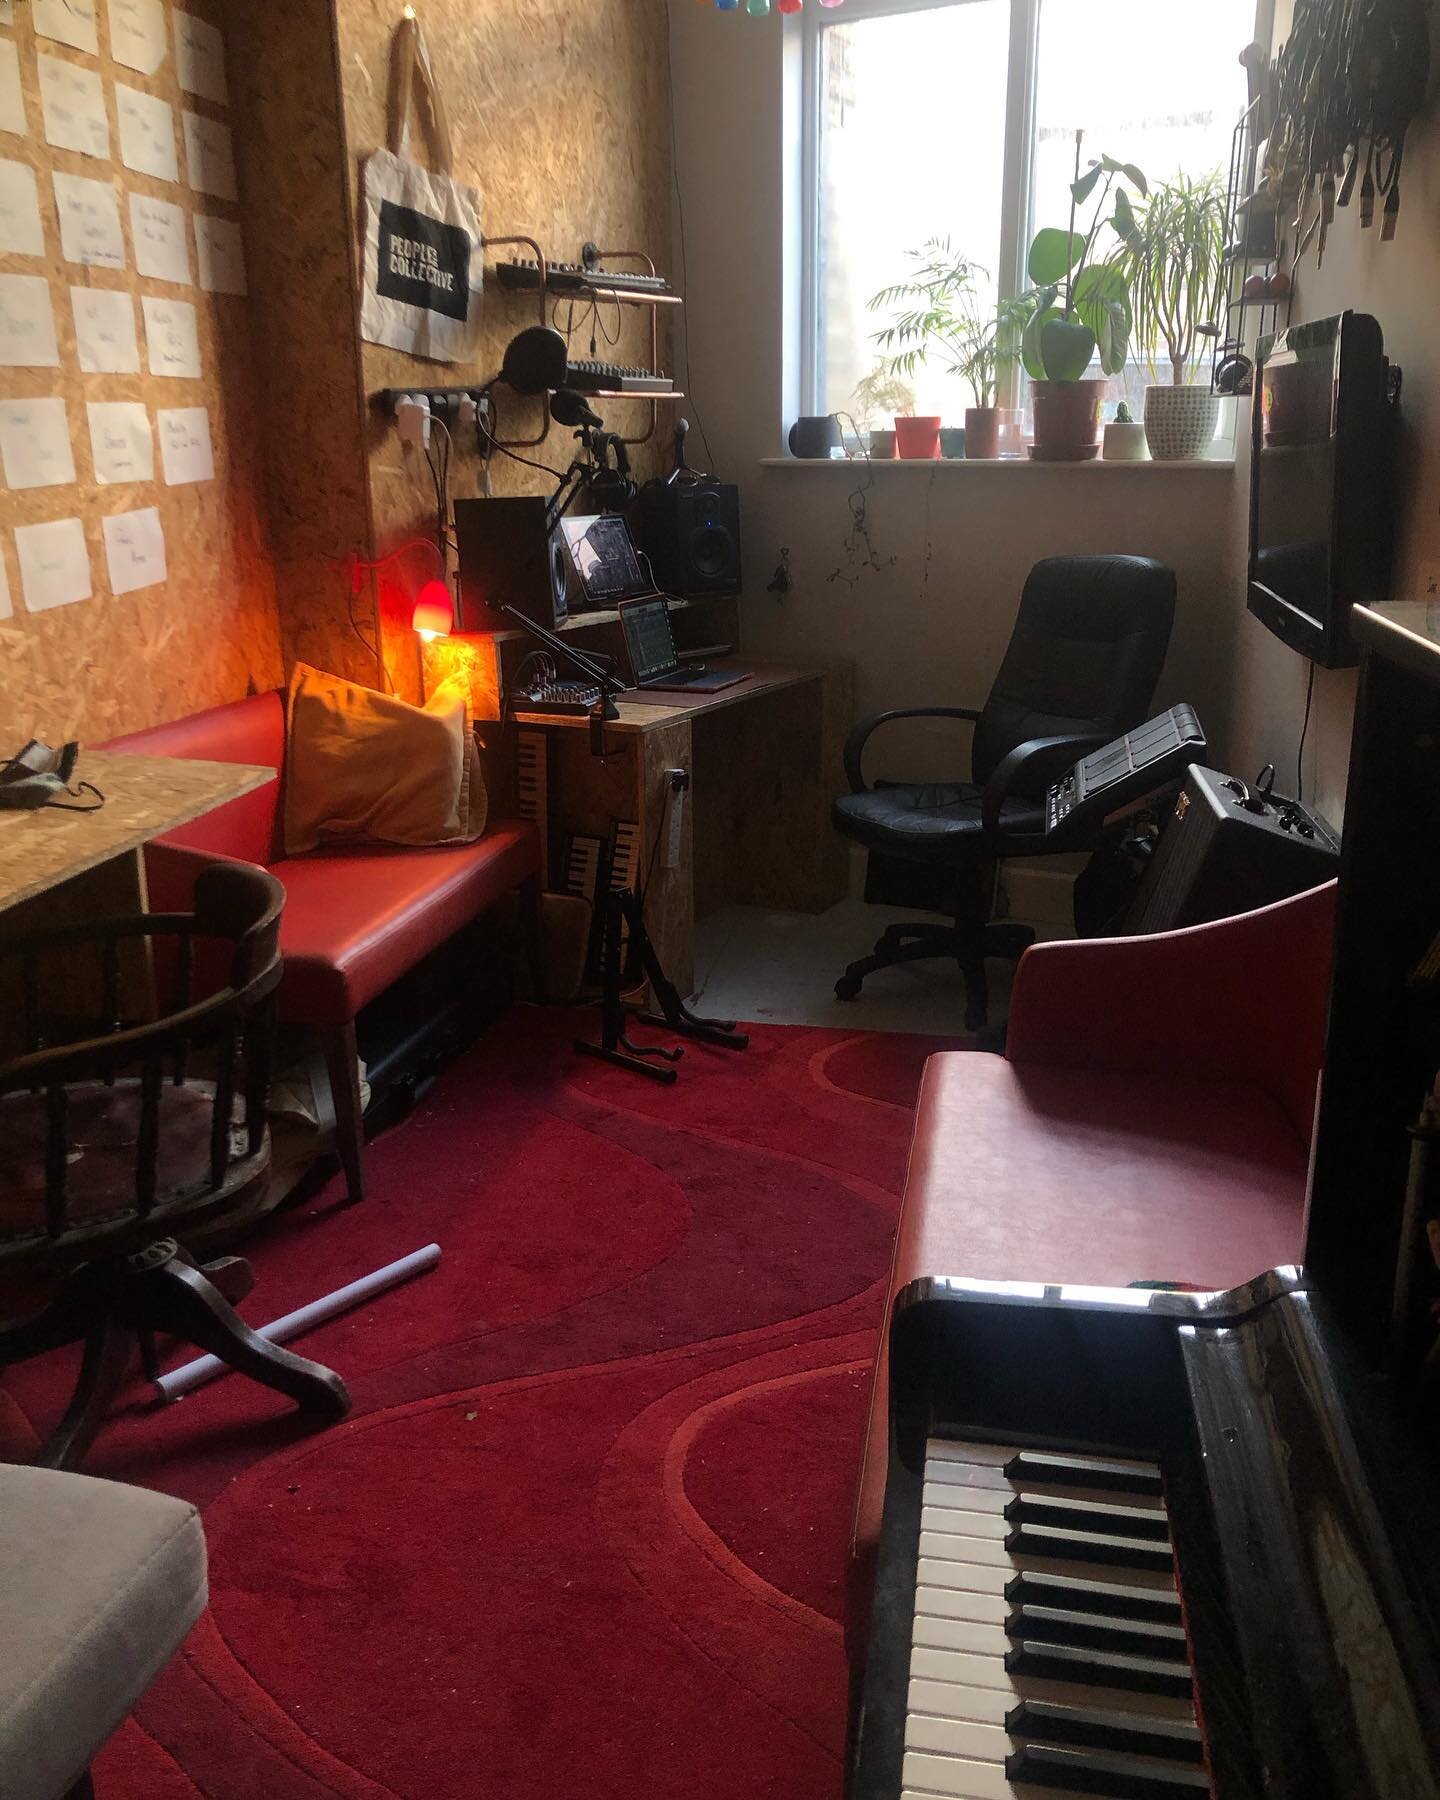 After years of working in my attic I&rsquo;m so excited to have moved into my new studio @printworksmargate 
@brigitteaphrodite and Sappho love it too ❤️❤️
#newmusic #newstudio